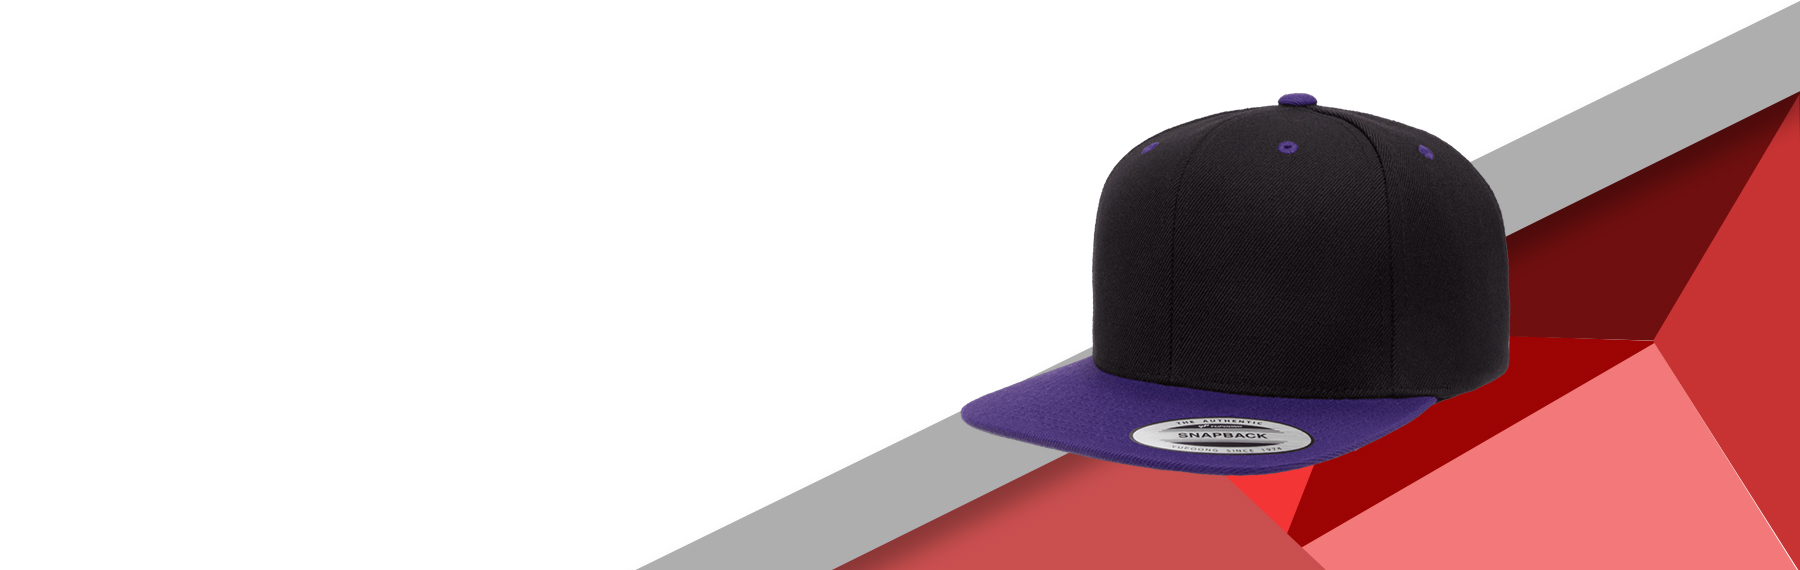 Custom Fitted Hats Online in Canada